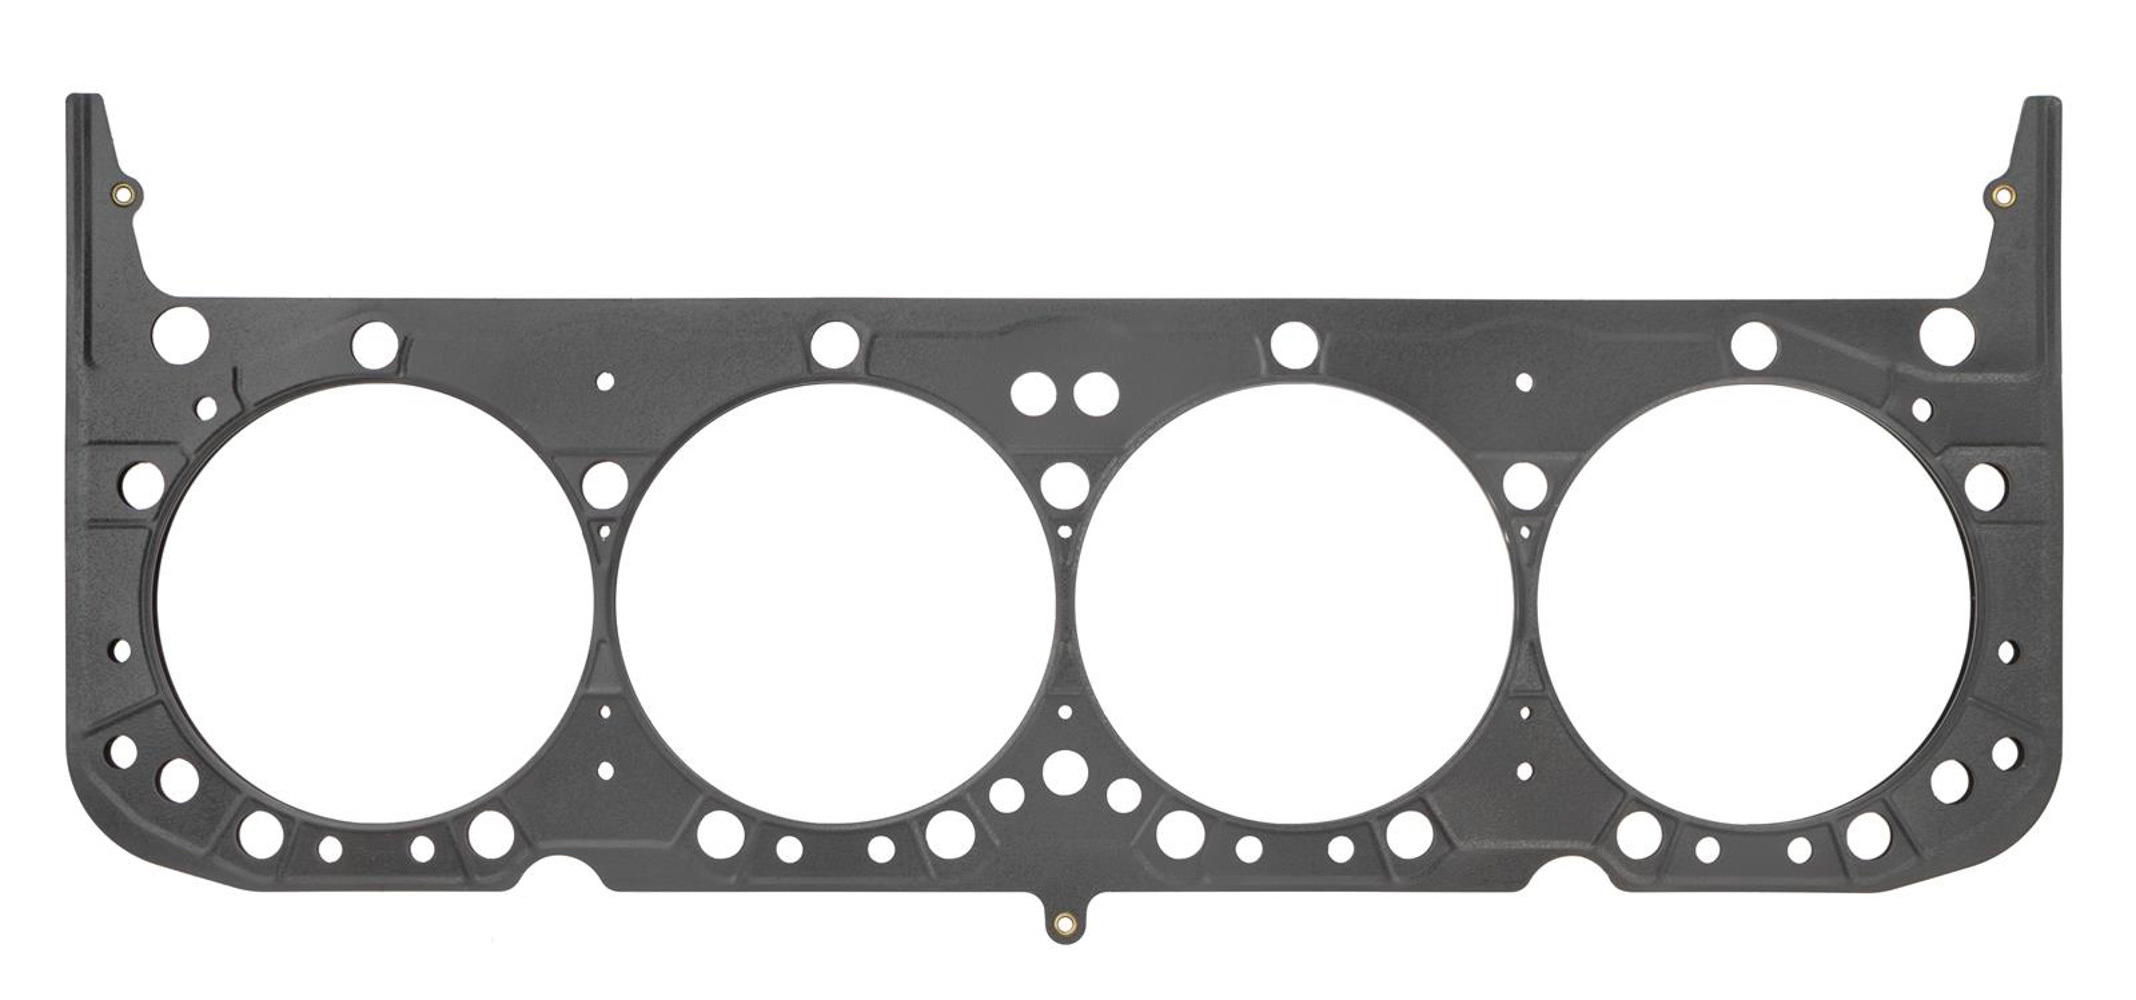 SCE Gaskets M110651 - Cylinder Head Gasket, MLS Spartan, 4.067 in Bore, 0.051 in Compression Thickness, Multi-Layer Steel, Small Block Chevy, Each